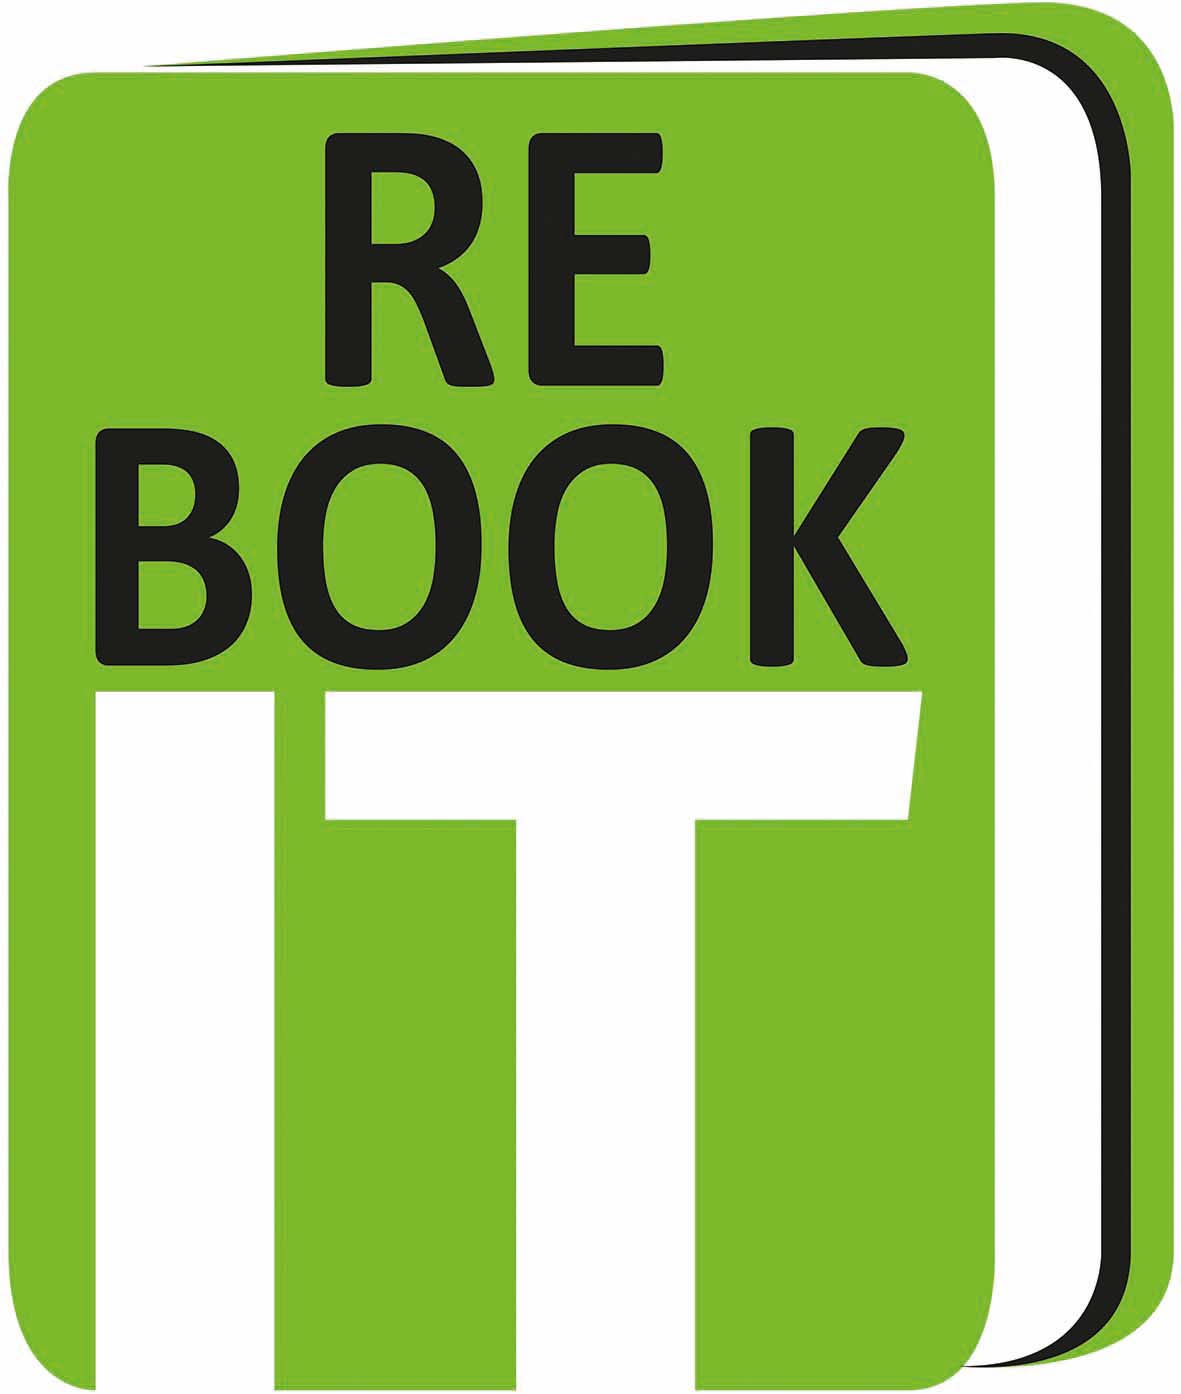 RE-BOOK IT Re-use knowledge Eco and euro friendly secondhand student books www.rebookit.be info@rebookit.be www.facebook.